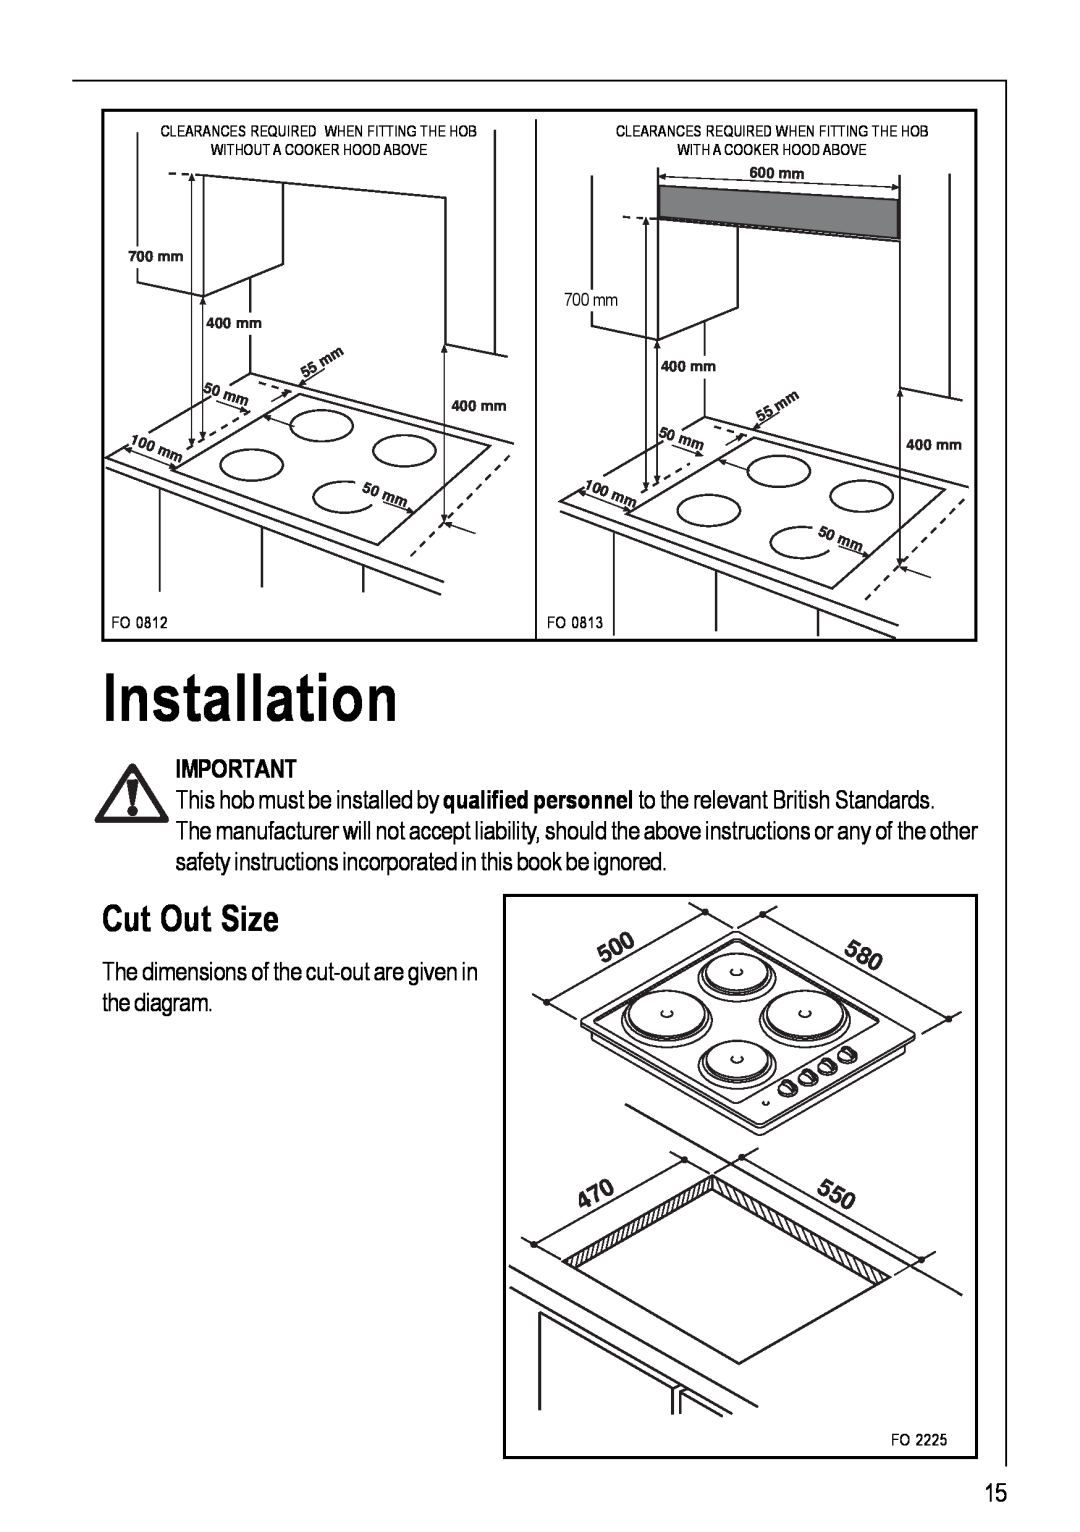 Electrolux 116 K operating instructions Cut Out Size, Installation 